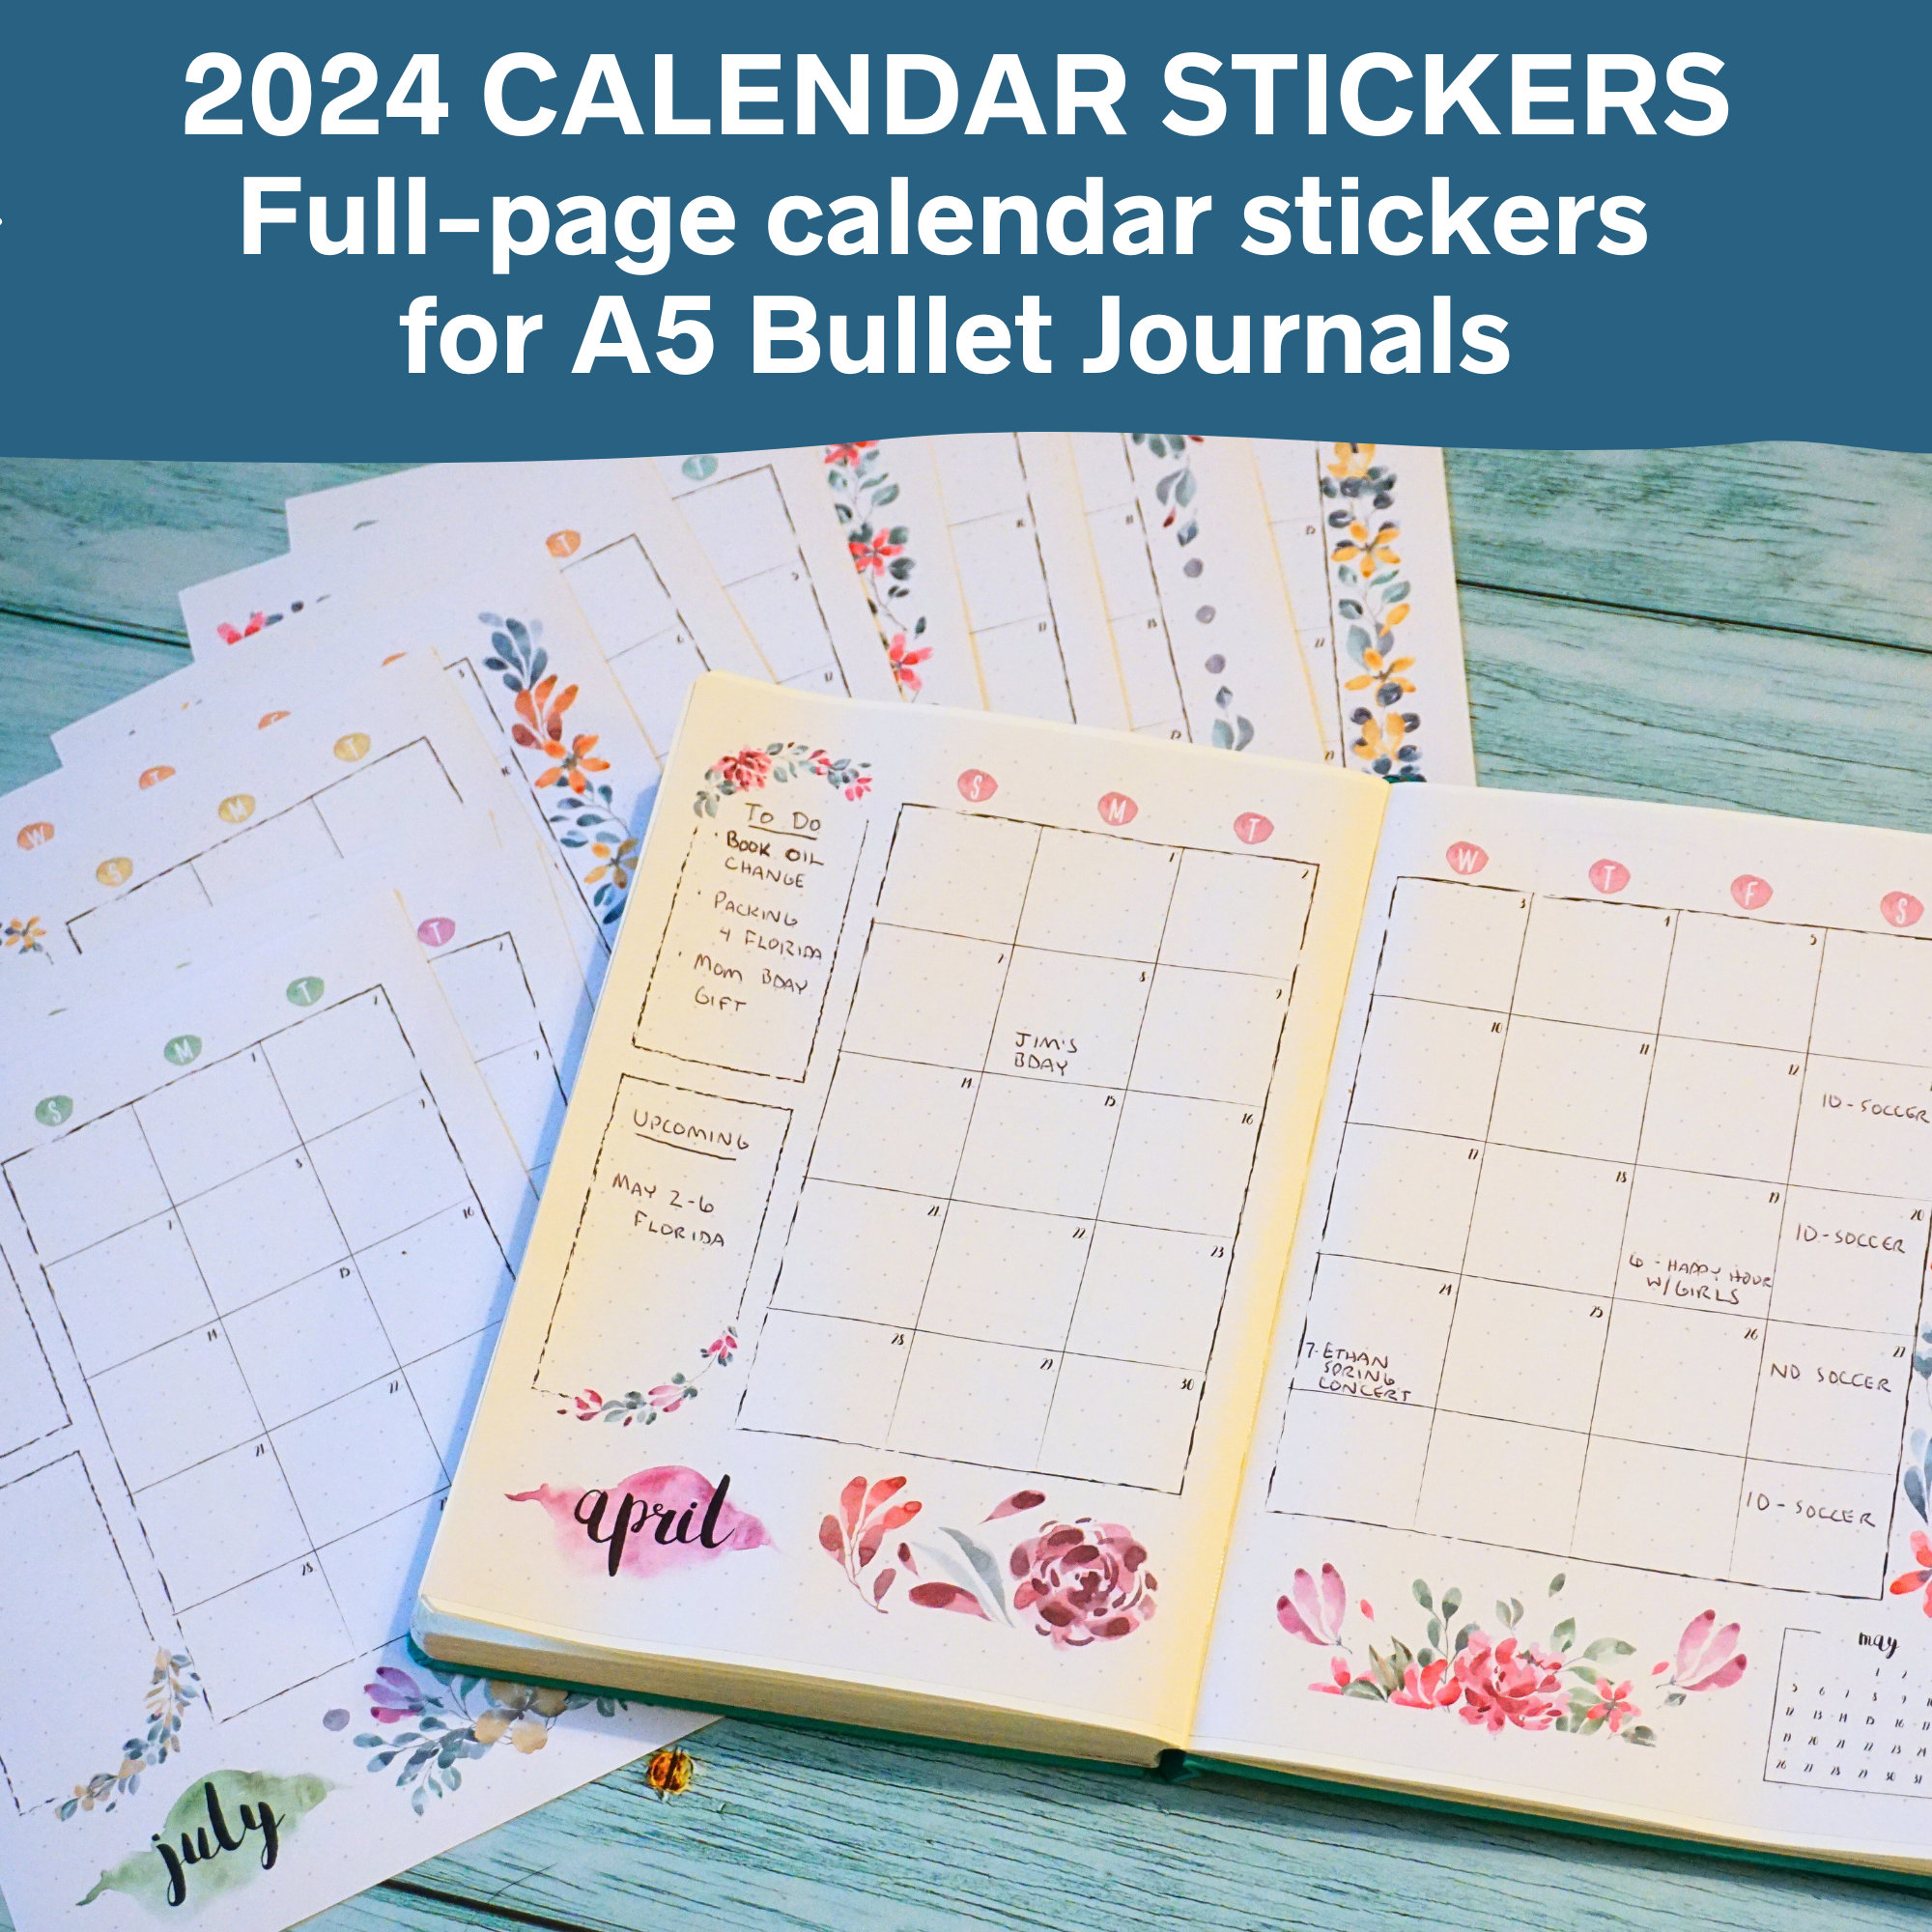 Sunny Streak Ultimate Productivity Stencils & Stickers - X20 Sheets of Planner Stickers, X6 Stencils - Calendars, to Do Lists, Habit Trackers, Goals 